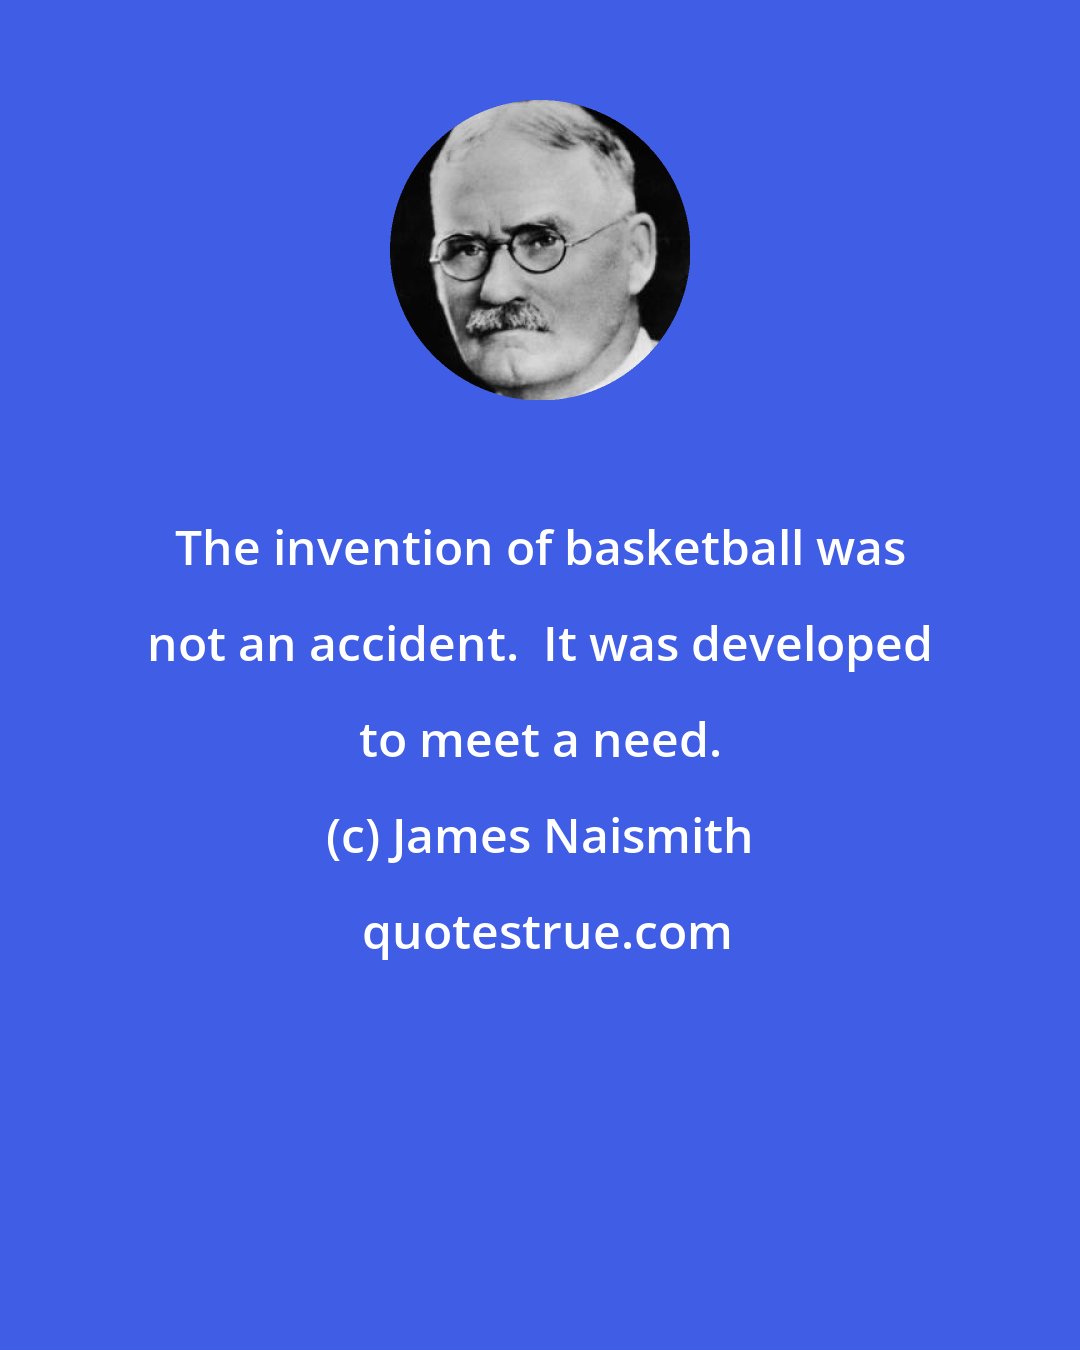 James Naismith: The invention of basketball was not an accident.  It was developed to meet a need.